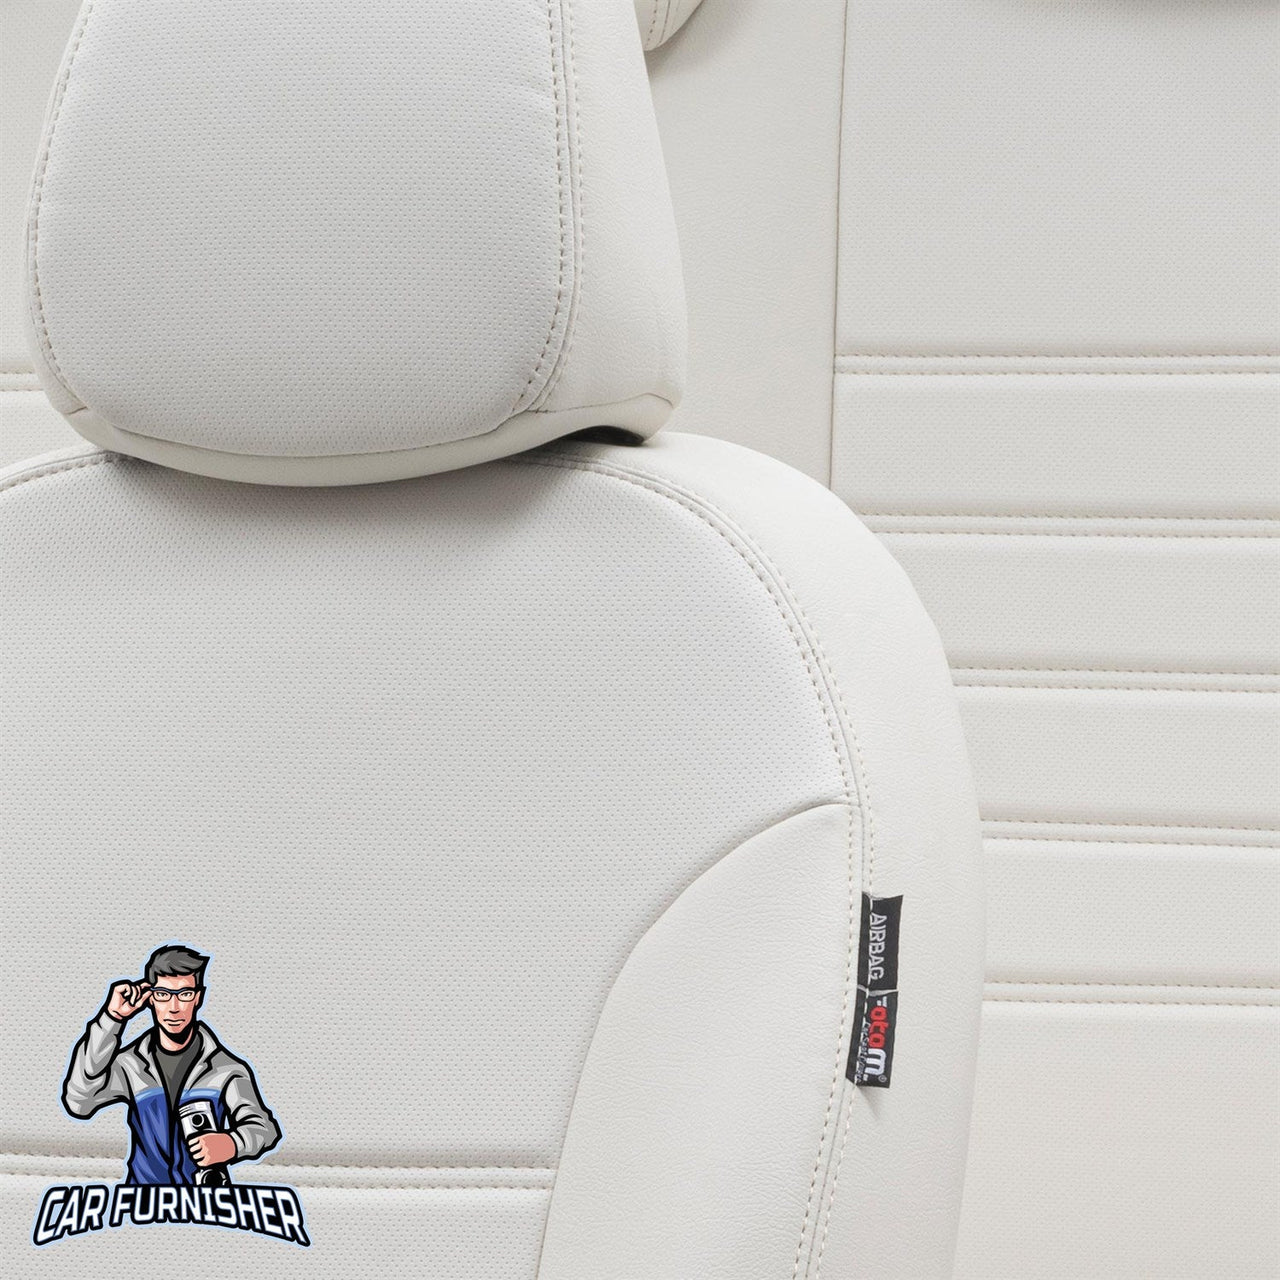 Jeep Compass Seat Covers Istanbul Leather Design Ivory Leather